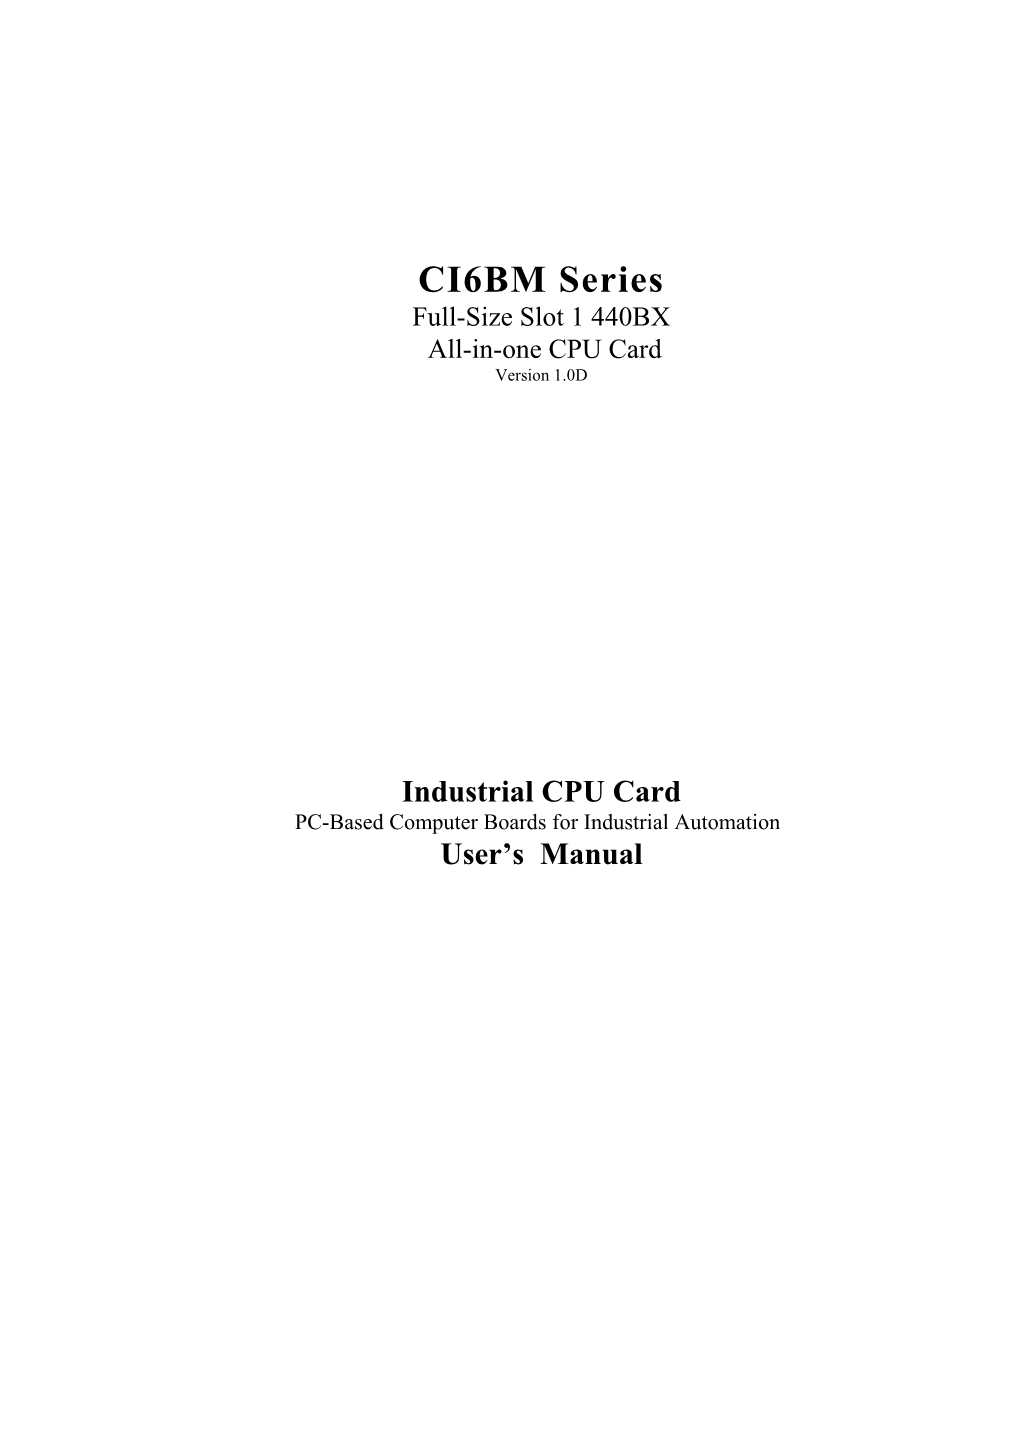 CI6BM Series Full-Size Slot 1 440BX All-In-One CPU Card Version 1.0D